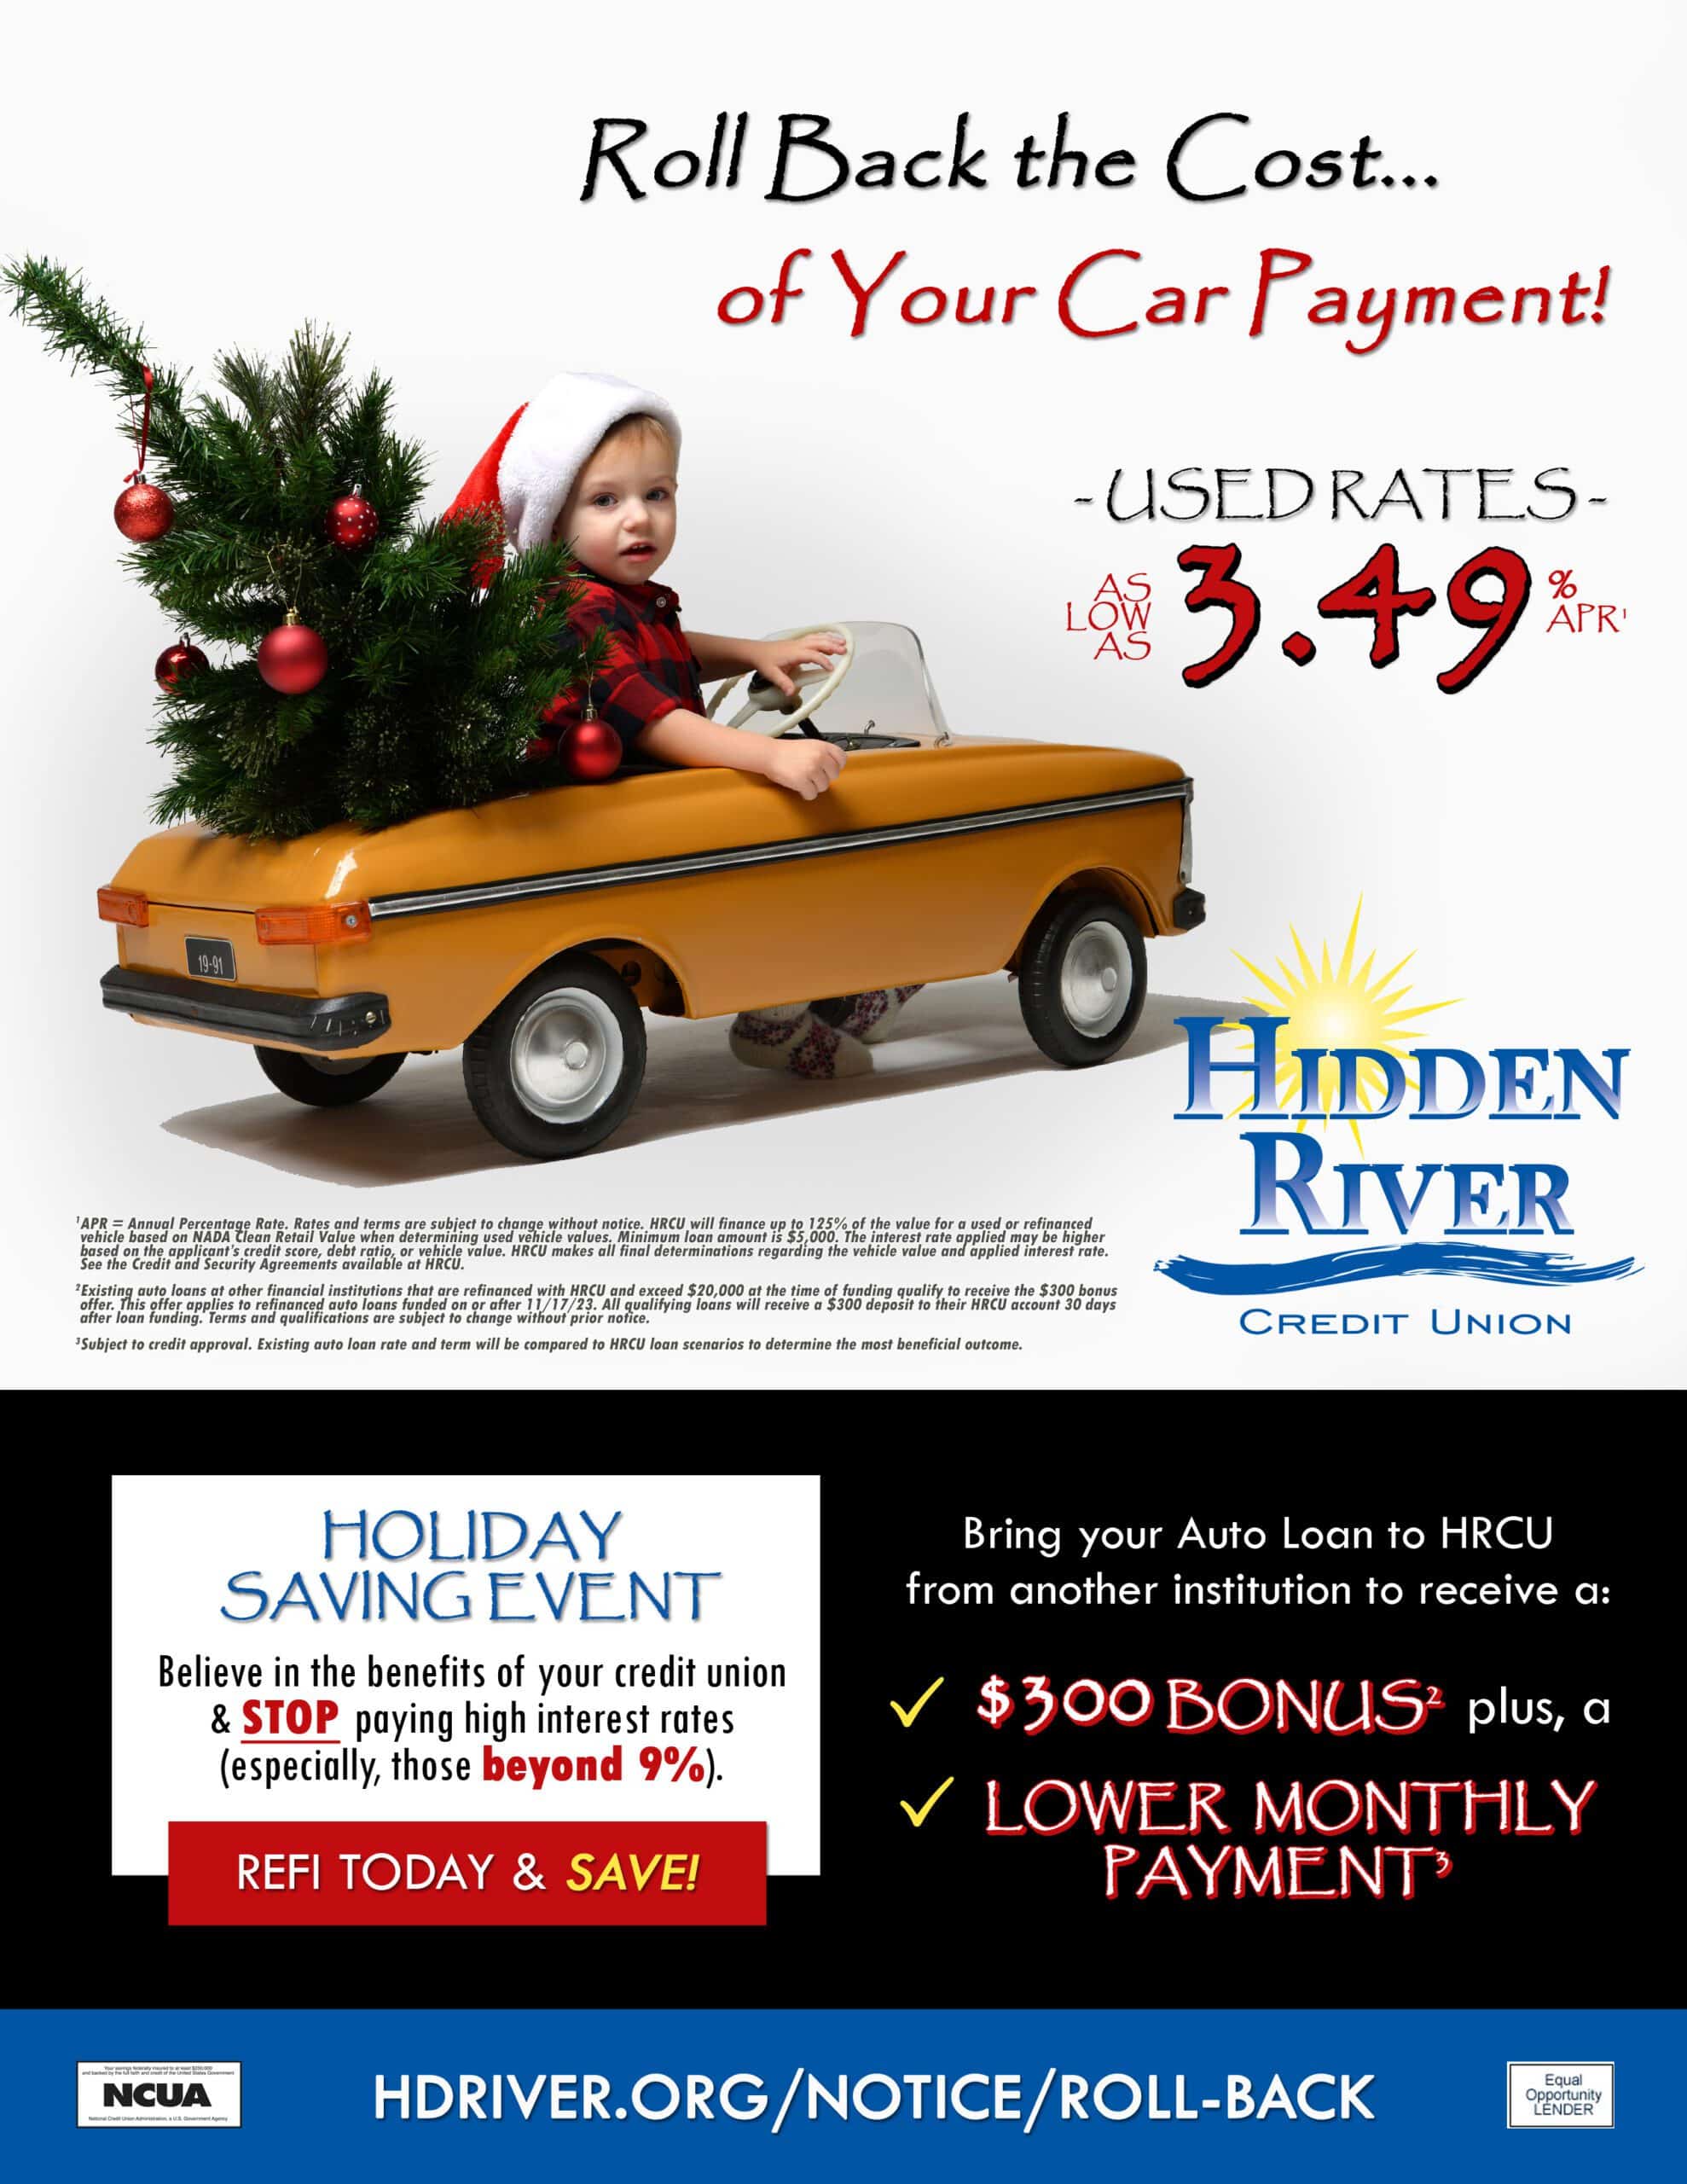 Young boy wearing a santa hat sitting in yellow car with a small Christmans tree with red balls. Red and black text " Roll Back the Cost000 of Your Car Payment! Used Rates as low as 3.49% APR." Additional text in blue, white, and black "Holiday Saving Event. Believe in the benefits of your credit union and STOP paying high interest rates (especially those beyond 9%). REFI TODAY & SAVE! Bring your Auto Loan to HRCU from another institution to receive a: $300 Bonus plus, a Lower Monthly Payment."